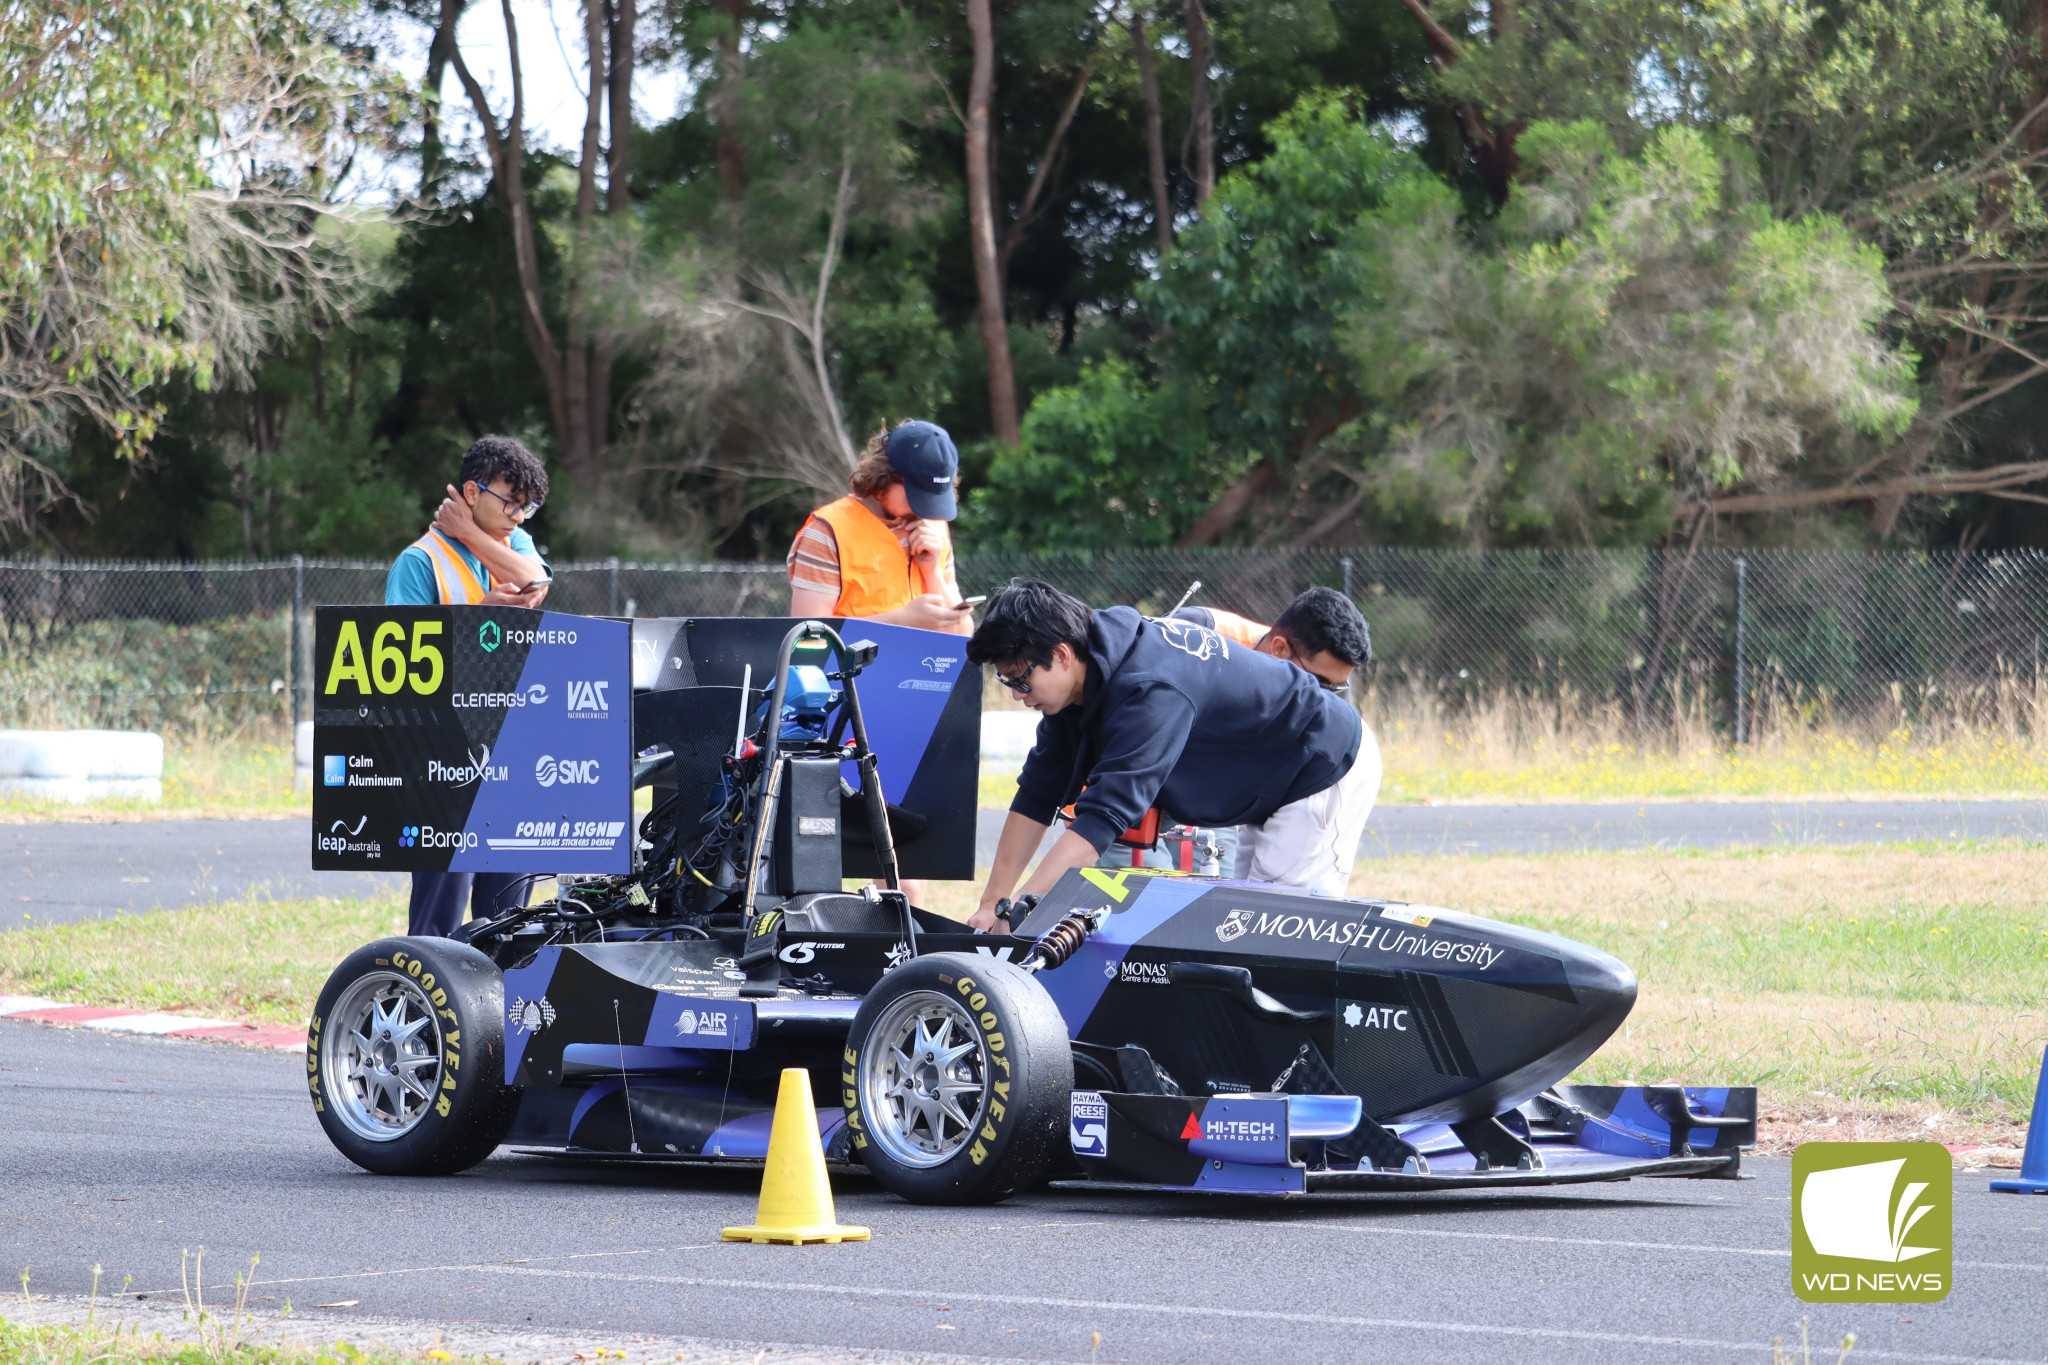 Testing: Members of the Monash Motorsport work on an autonomous race car at Cobden on Friday.